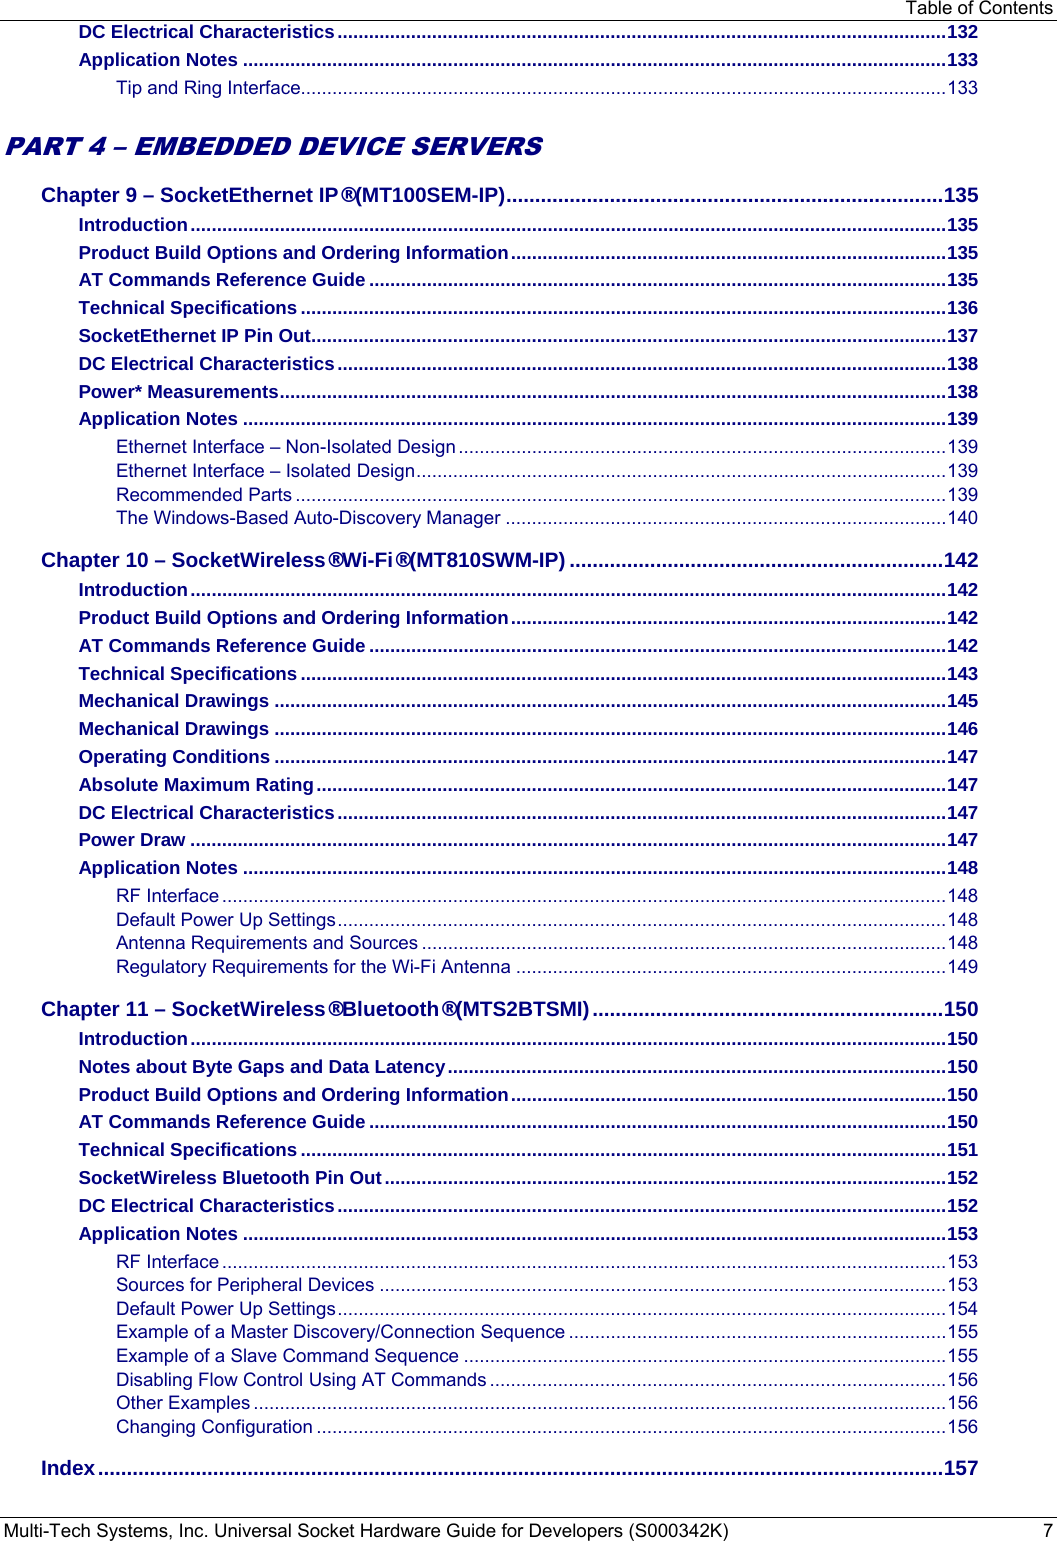 Table of Contents Multi-Tech Systems, Inc. Universal Socket Hardware Guide for Developers (S000342K)  7 DC Electrical Characteristics .................................................................................................................... 132 Application Notes ...................................................................................................................................... 133 Tip and Ring Interface........................................................................................................................... 133  PART 4 – EMBEDDED DEVICE SERVERS Chapter 9 – SocketEthernet IP® (MT100SEM-IP) ............................................................................ 135 Introduction ................................................................................................................................................ 135 Product Build Options and Ordering Information ................................................................................... 135 AT Commands Reference Guide .............................................................................................................. 135 Technical Specifications ........................................................................................................................... 136 SocketEthernet IP Pin Out ......................................................................................................................... 137 DC Electrical Characteristics .................................................................................................................... 138 Power* Measurements ............................................................................................................................... 138 Application Notes ...................................................................................................................................... 139 Ethernet Interface – Non-Isolated Design ............................................................................................. 139 Ethernet Interface – Isolated Design ..................................................................................................... 139 Recommended Parts ............................................................................................................................ 139 The Windows-Based Auto-Discovery Manager .................................................................................... 140 Chapter 10 – SocketWireless® Wi-Fi® (MT810SWM-IP) ................................................................. 142 Introduction ................................................................................................................................................ 142 Product Build Options and Ordering Information ................................................................................... 142 AT Commands Reference Guide .............................................................................................................. 142 Technical Specifications ........................................................................................................................... 143 Mechanical Drawings ................................................................................................................................ 145 Mechanical Drawings ................................................................................................................................ 146 Operating Conditions ................................................................................................................................ 147 Absolute Maximum Rating ........................................................................................................................ 147 DC Electrical Characteristics .................................................................................................................... 147 Power Draw ................................................................................................................................................ 147 Application Notes ...................................................................................................................................... 148 RF Interface .......................................................................................................................................... 148 Default Power Up Settings .................................................................................................................... 148 Antenna Requirements and Sources .................................................................................................... 148 Regulatory Requirements for the Wi-Fi Antenna .................................................................................. 149 Chapter 11 – SocketWireless® Bluetooth® (MTS2BTSMI) ............................................................. 150 Introduction ................................................................................................................................................ 150 Notes about Byte Gaps and Data Latency ............................................................................................... 150 Product Build Options and Ordering Information ................................................................................... 150 AT Commands Reference Guide .............................................................................................................. 150 Technical Specifications ........................................................................................................................... 151 SocketWireless Bluetooth Pin Out ........................................................................................................... 152 DC Electrical Characteristics .................................................................................................................... 152 Application Notes ...................................................................................................................................... 153 RF Interface .......................................................................................................................................... 153 Sources for Peripheral Devices ............................................................................................................ 153 Default Power Up Settings .................................................................................................................... 154 Example of a Master Discovery/Connection Sequence ........................................................................ 155 Example of a Slave Command Sequence ............................................................................................ 155 Disabling Flow Control Using AT Commands ....................................................................................... 156 Other Examples .................................................................................................................................... 156 Changing Configuration ........................................................................................................................ 156 Index ................................................................................................................................................... 157  